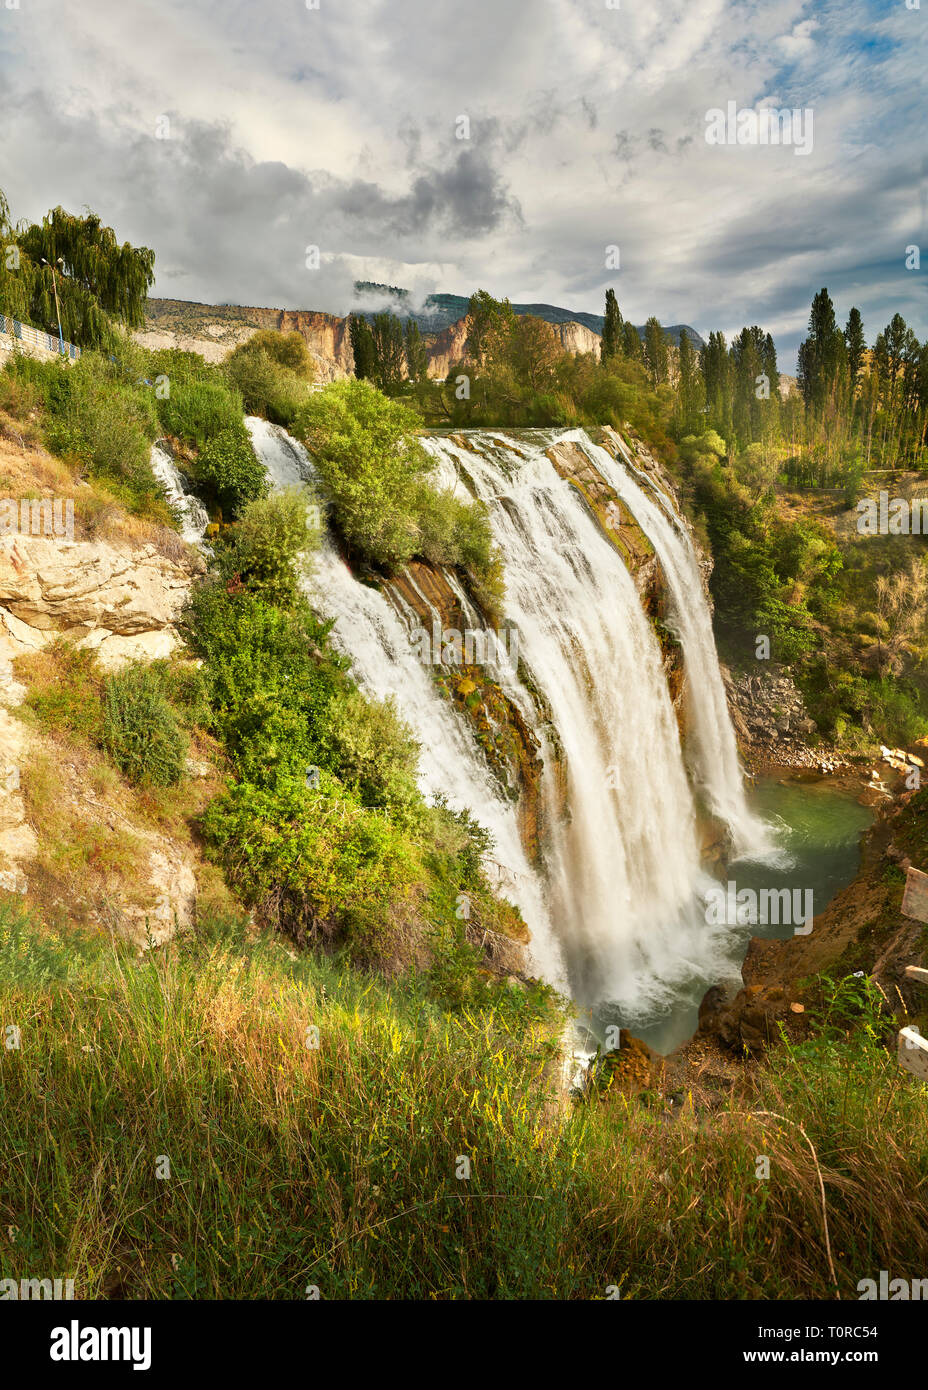 Pictures & Images of the Tortum Water Falls, Coruh Valley, Erzurum in the Eastern Anatolia, Turkey.  The Tortum water falls are the largest in turkey  Stock Photo